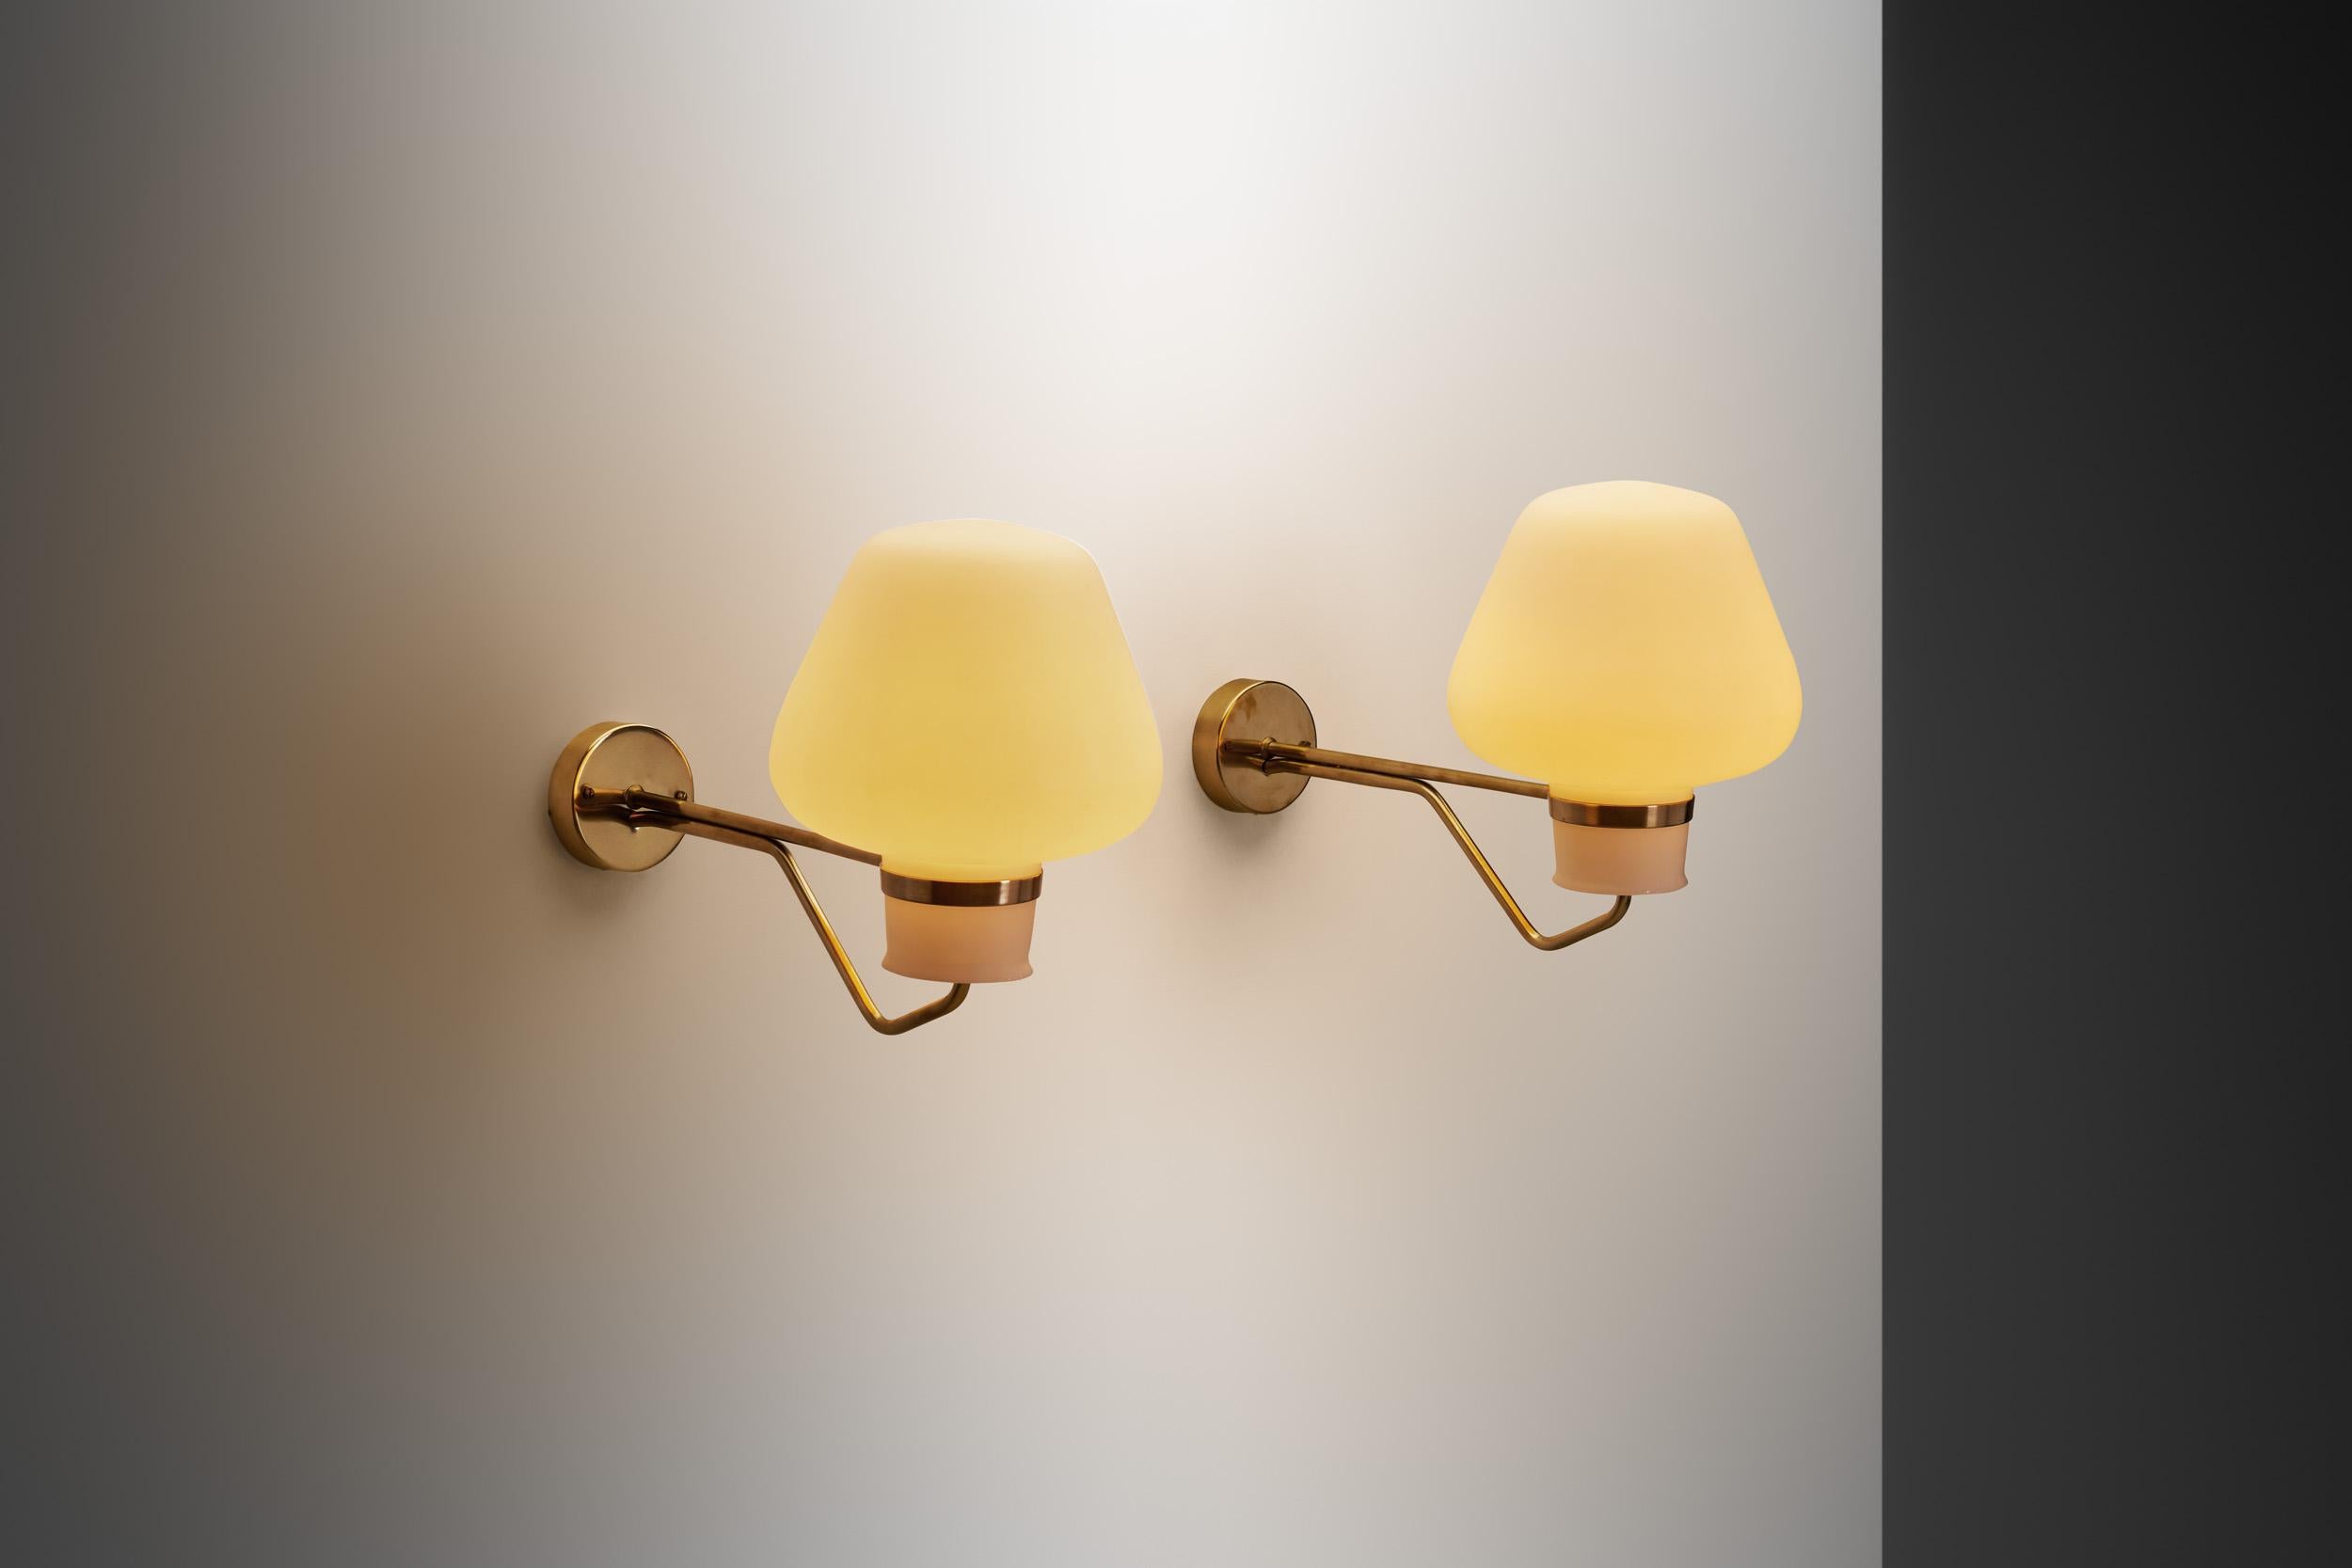 In the annals of mid-century modern design, the Swedish designer and architect, Gunnar Asplund stood out as a luminary, and his delicately sculptural creations, such as this pair of wall lamps from the 1950s, epitomize the era's sophistication and